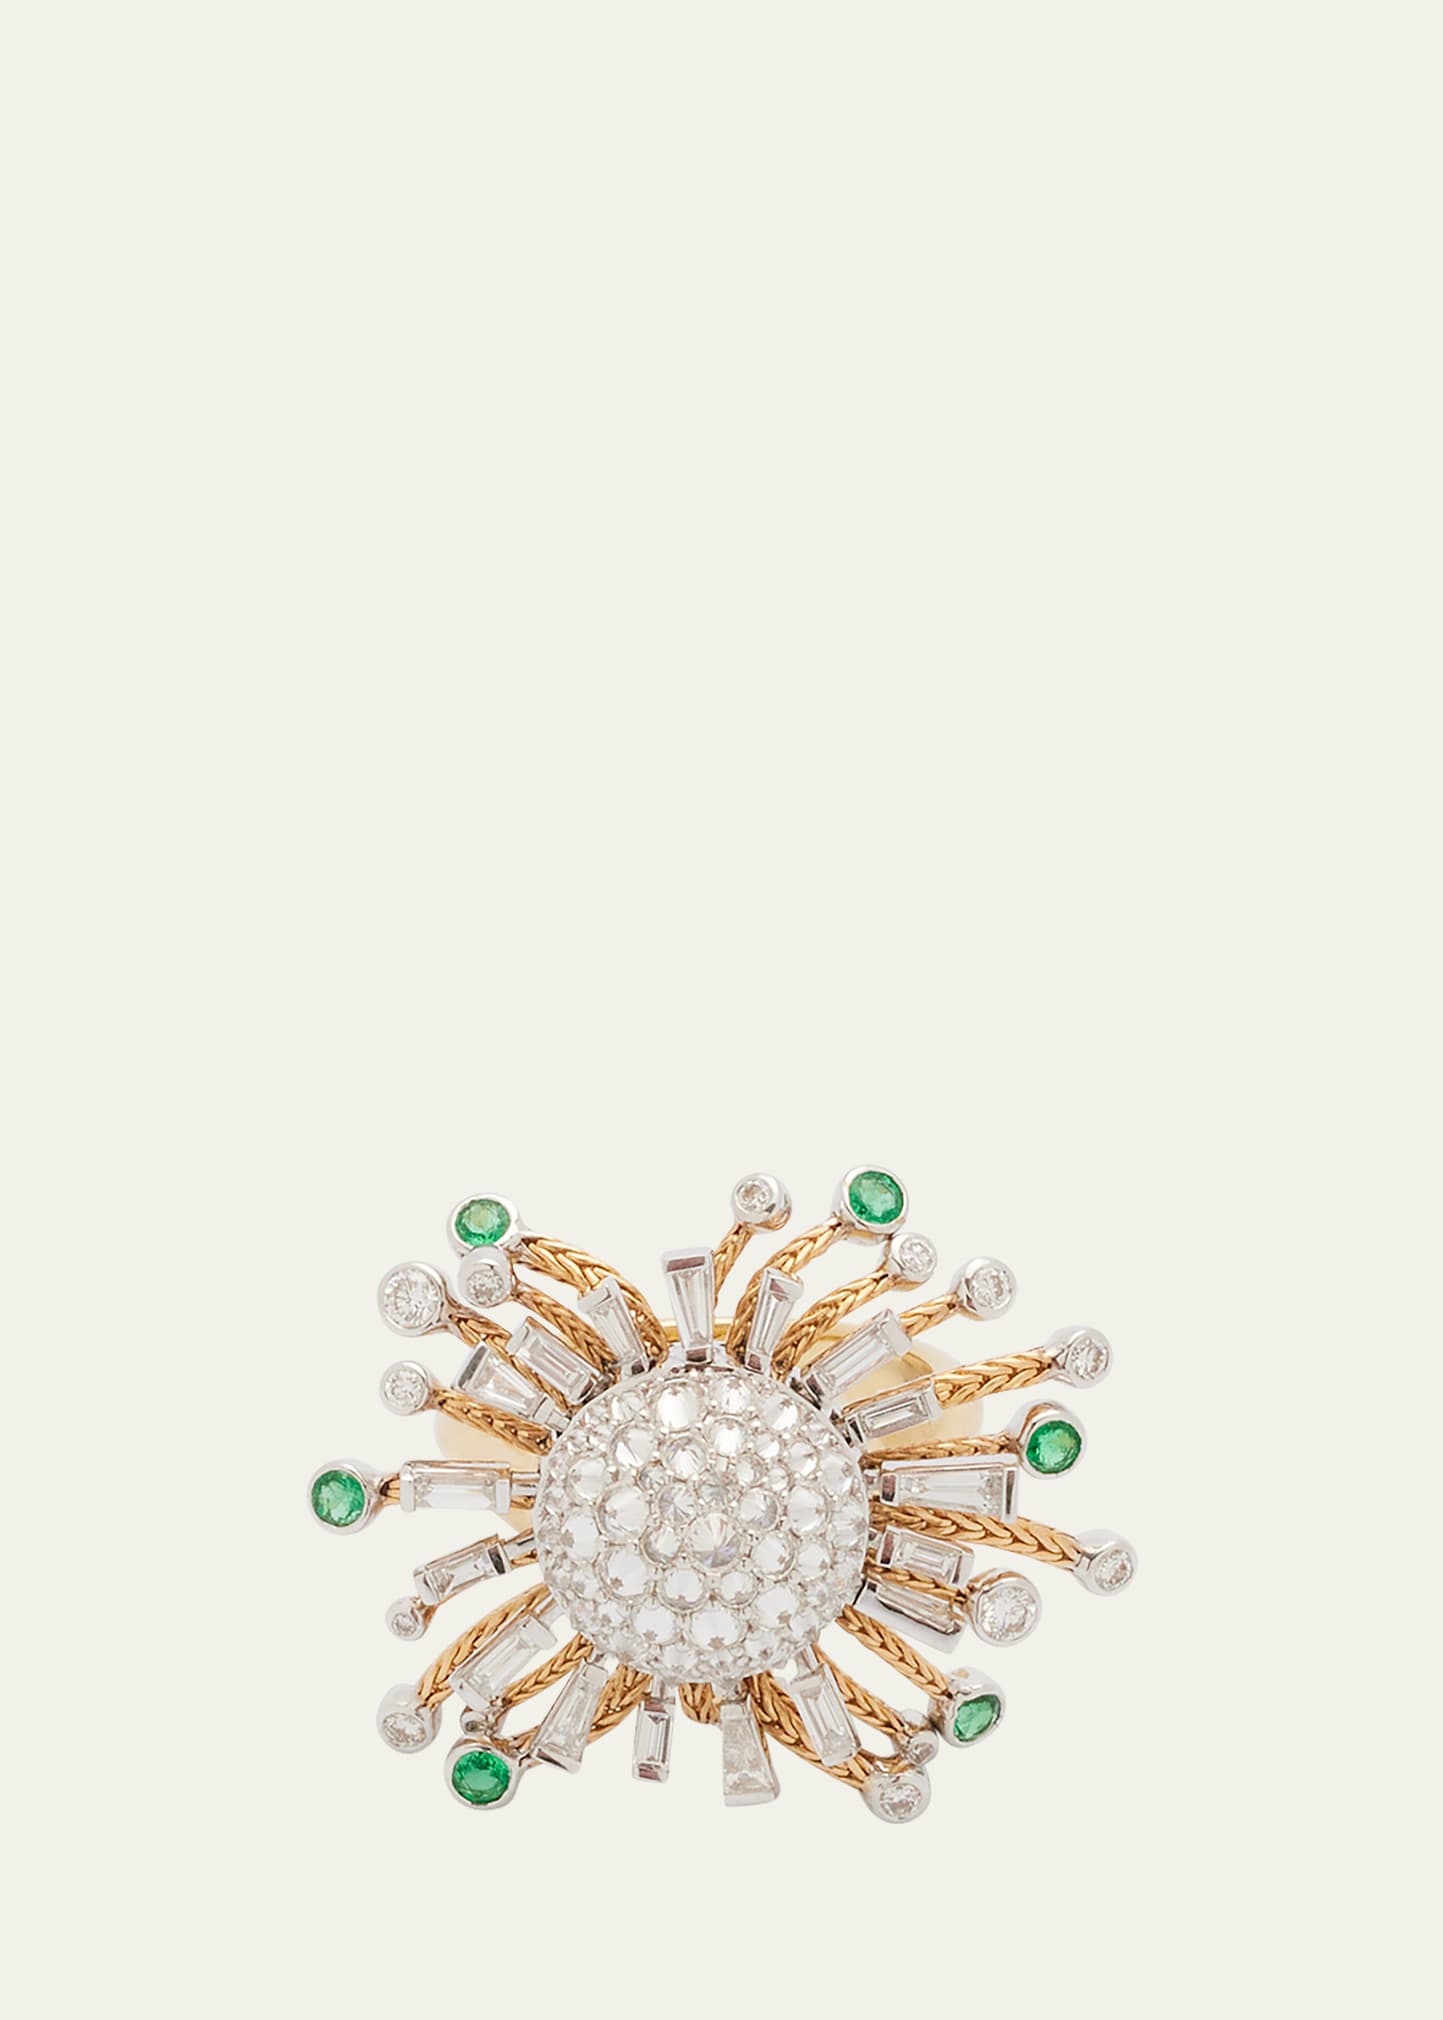 Together Burst Ring with Diamonds and Emeralds in Two-Tone 18K Gold